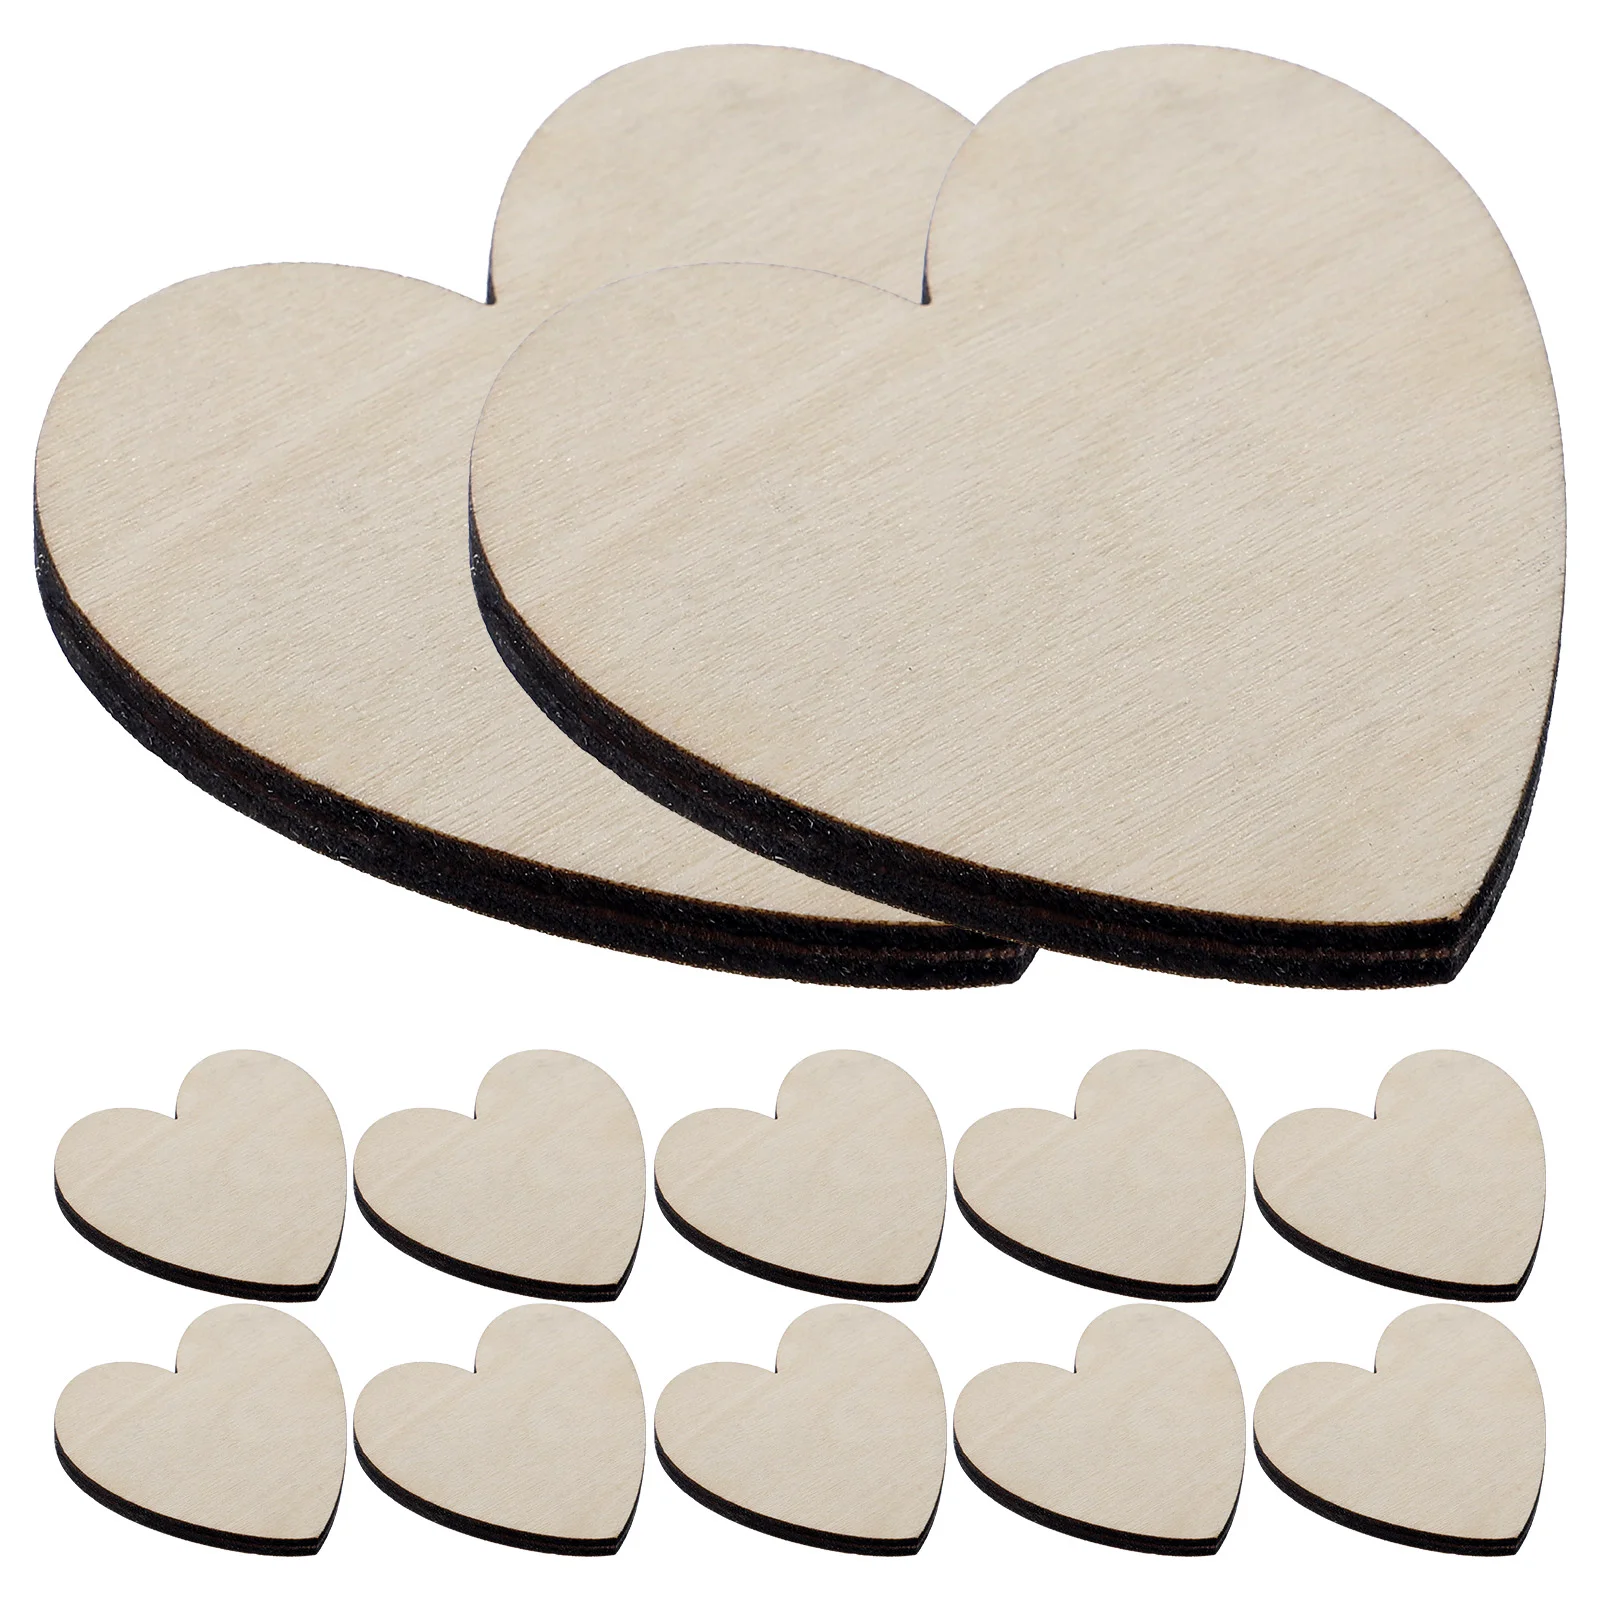 

20 Pcs Early Education Materials Easter Décor Unfinished Wood Cutouts Love Decoration for Christmas Wooden Heart Craft Supplies